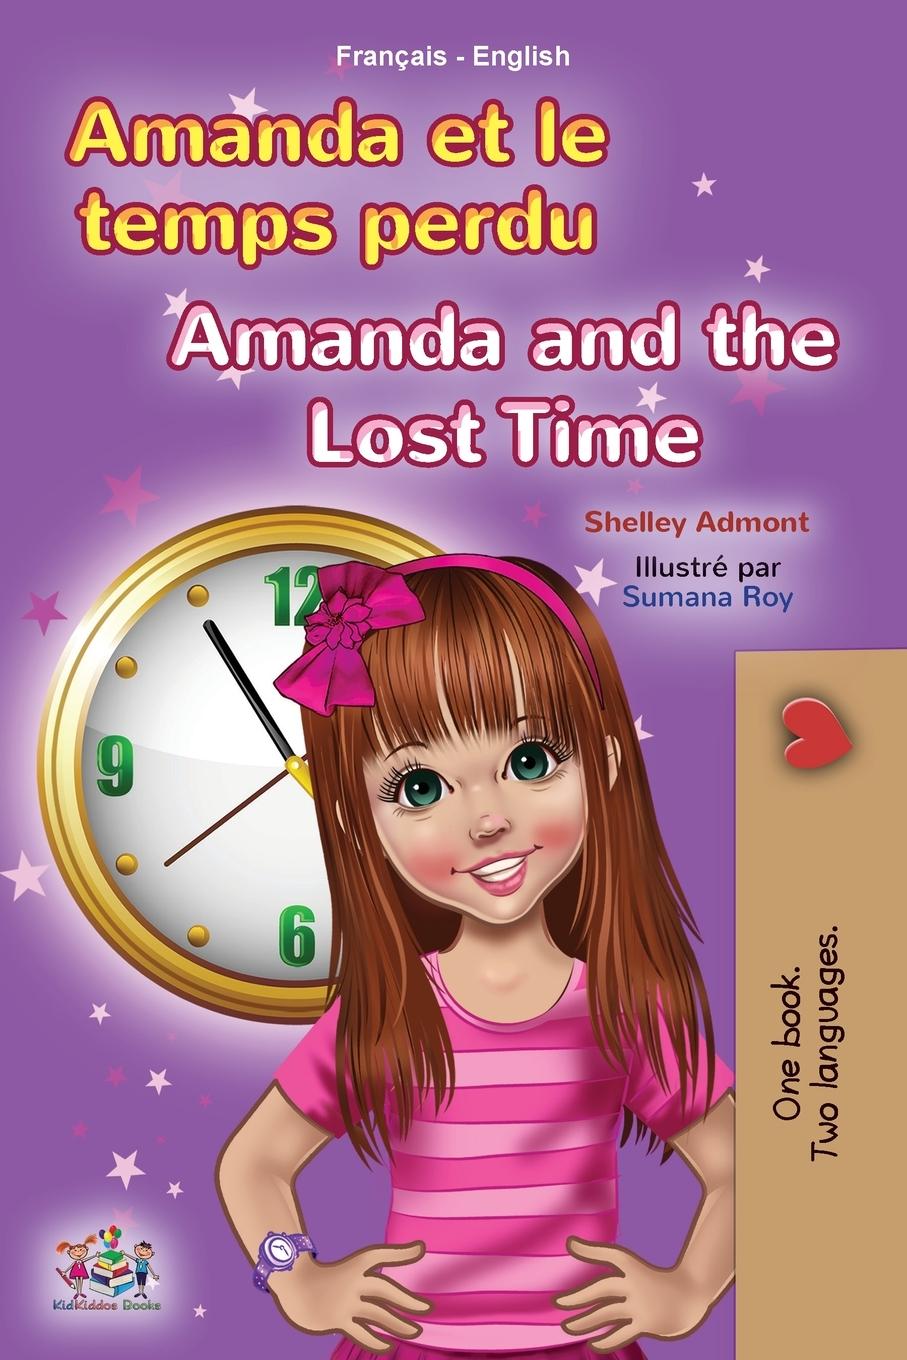 Könyv Amanda and the Lost Time (French English Bilingual Book for Kids) Kidkiddos Books